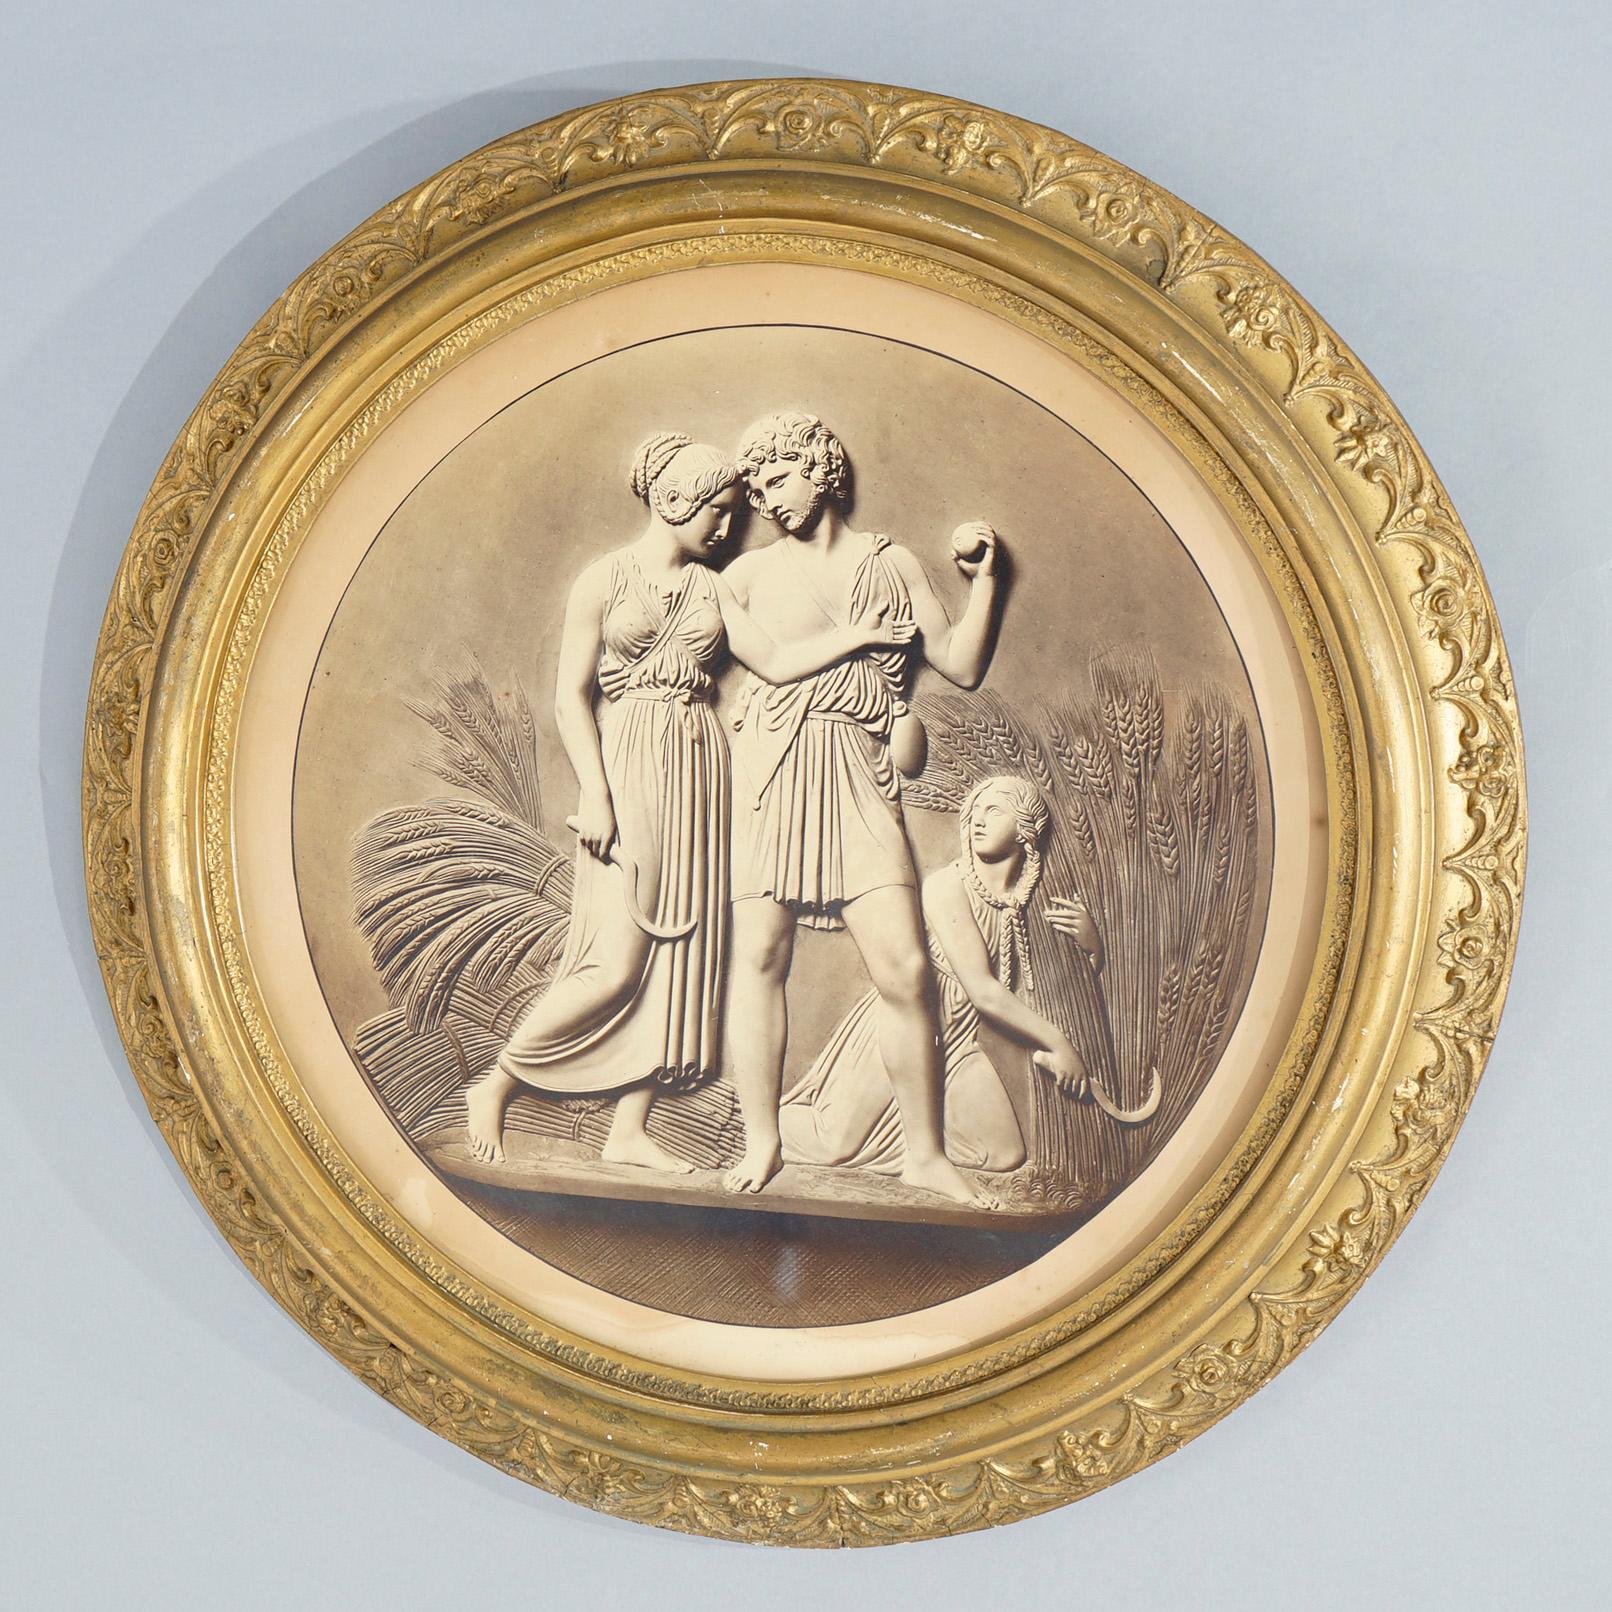 An antique Neoclassical print depicts figures and is seated in giltwood frame, c1880.

Measures- 23.25''H x 23.25''W x 3.25''D; sight: 18'' x 18''.

Catalogue Note: Ask about DISCOUNTED DELIVERY RATES available to most regions within 1,500 miles of